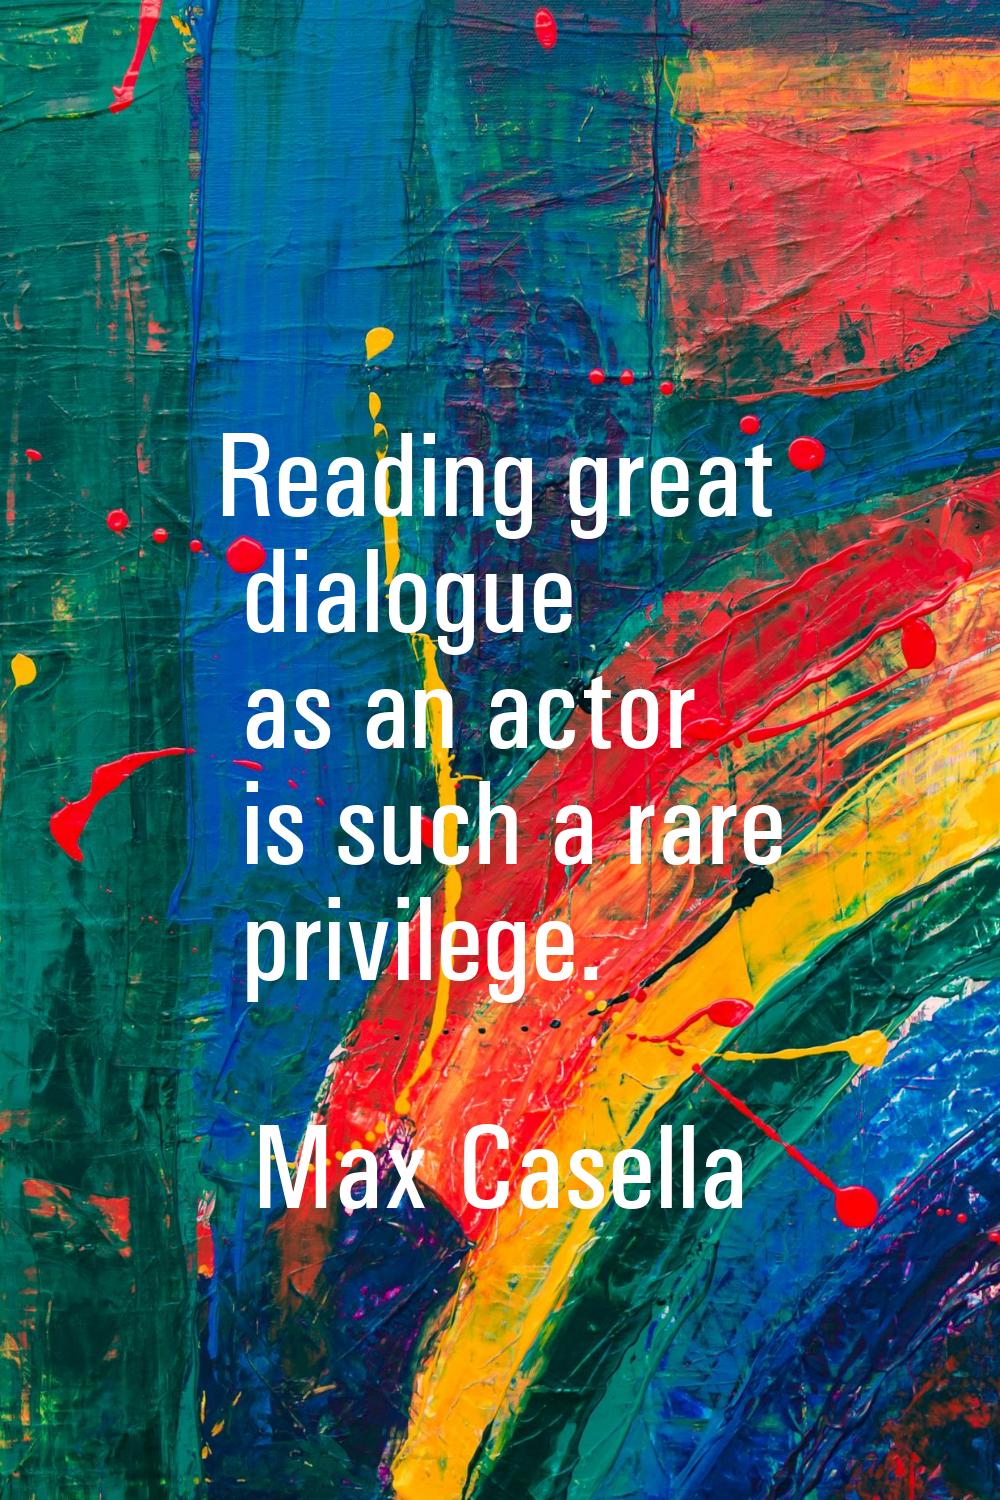 Reading great dialogue as an actor is such a rare privilege.